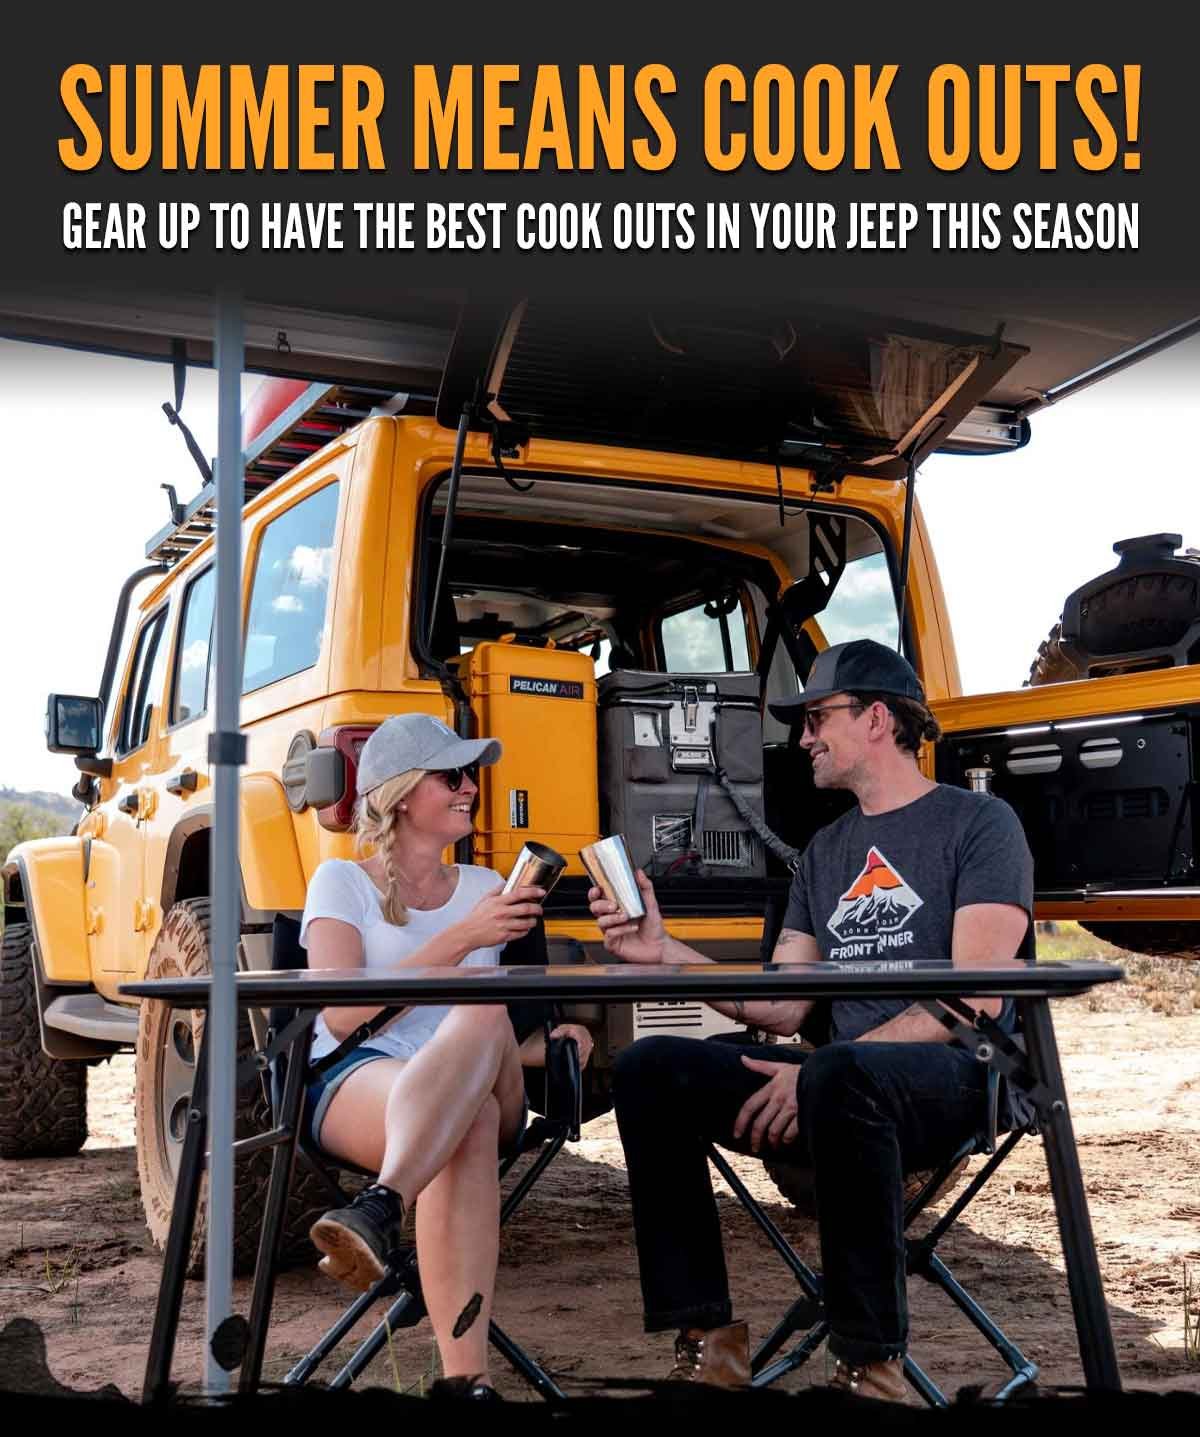 Summer Means Cook Outs! Gear Up To Have The Best Cook Outs In Your Jeep This Season